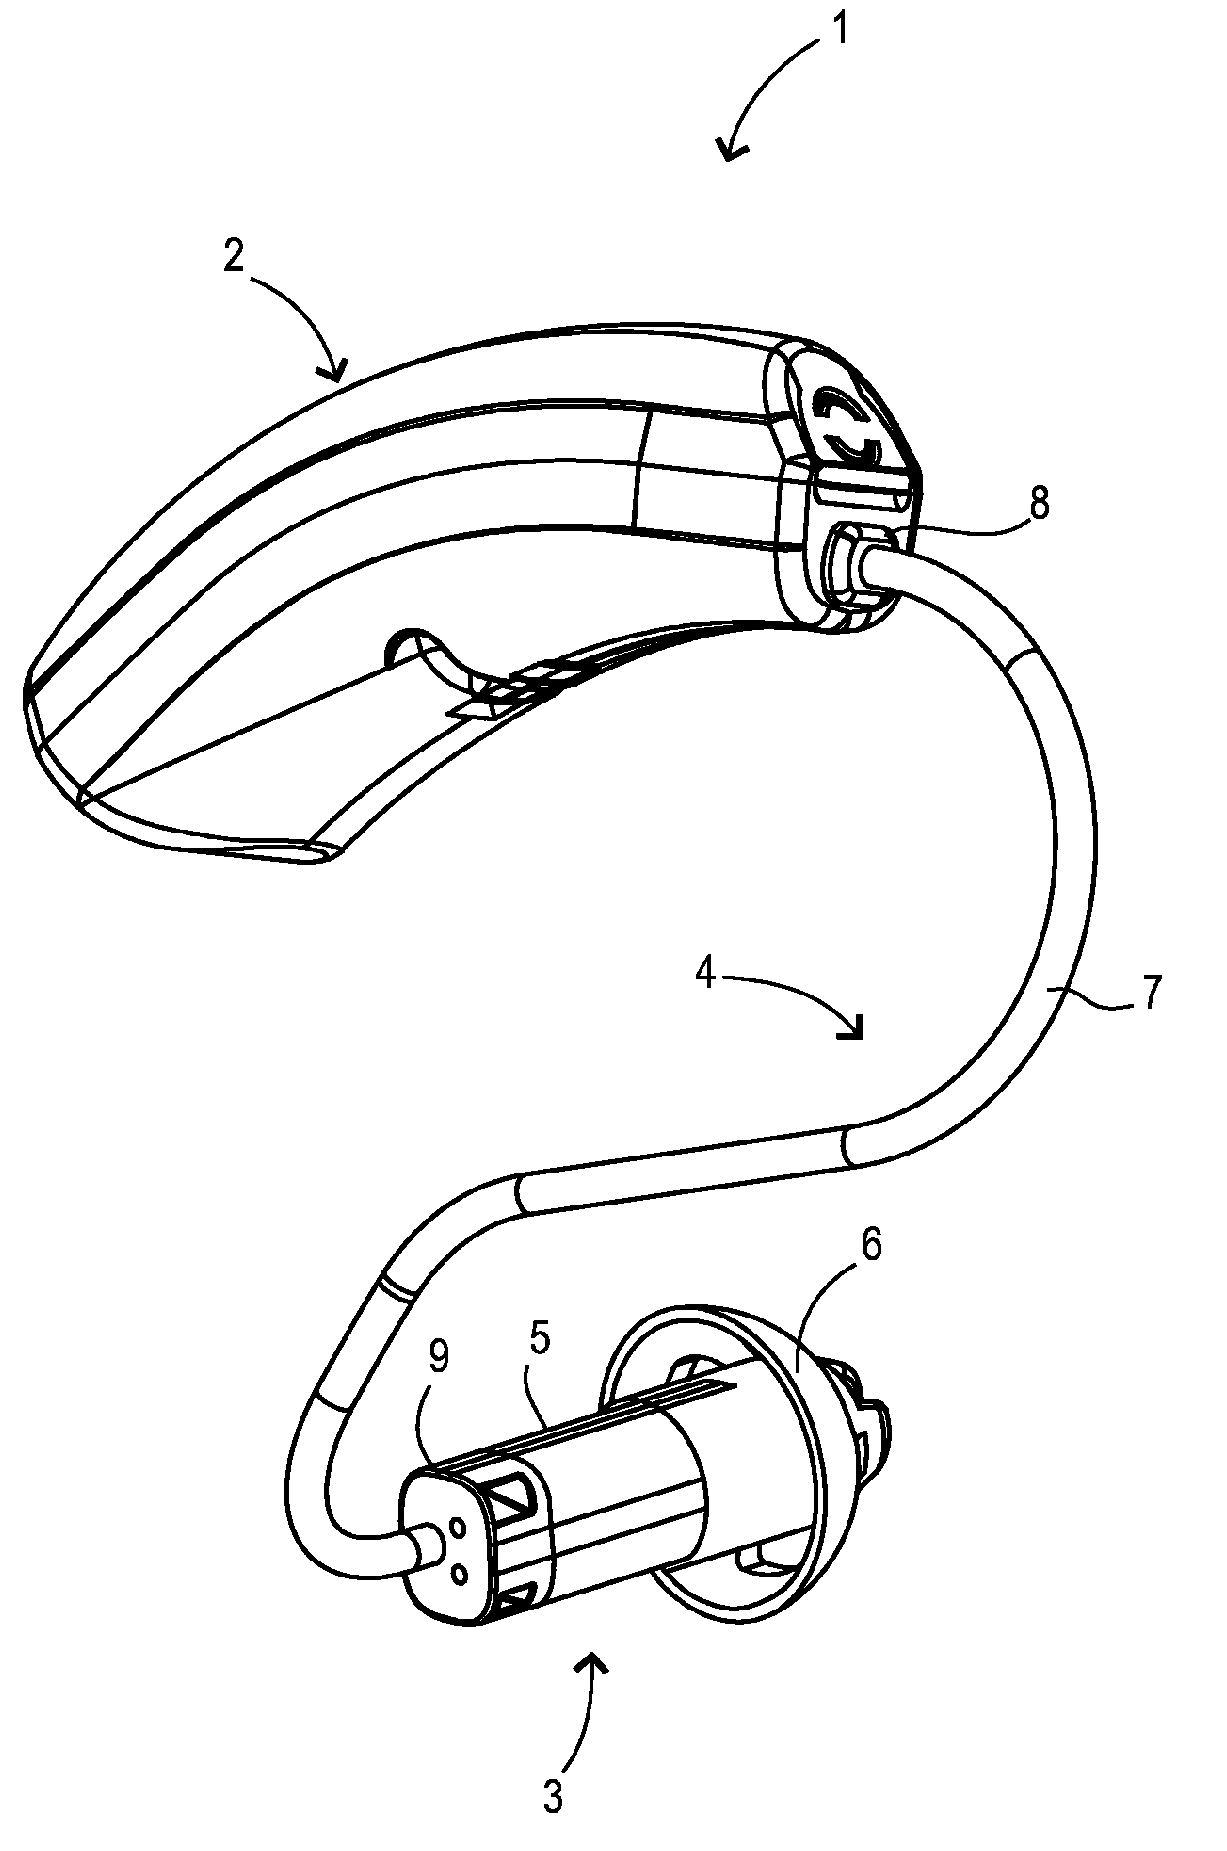 Method for identifying a receiver in a hearing aid